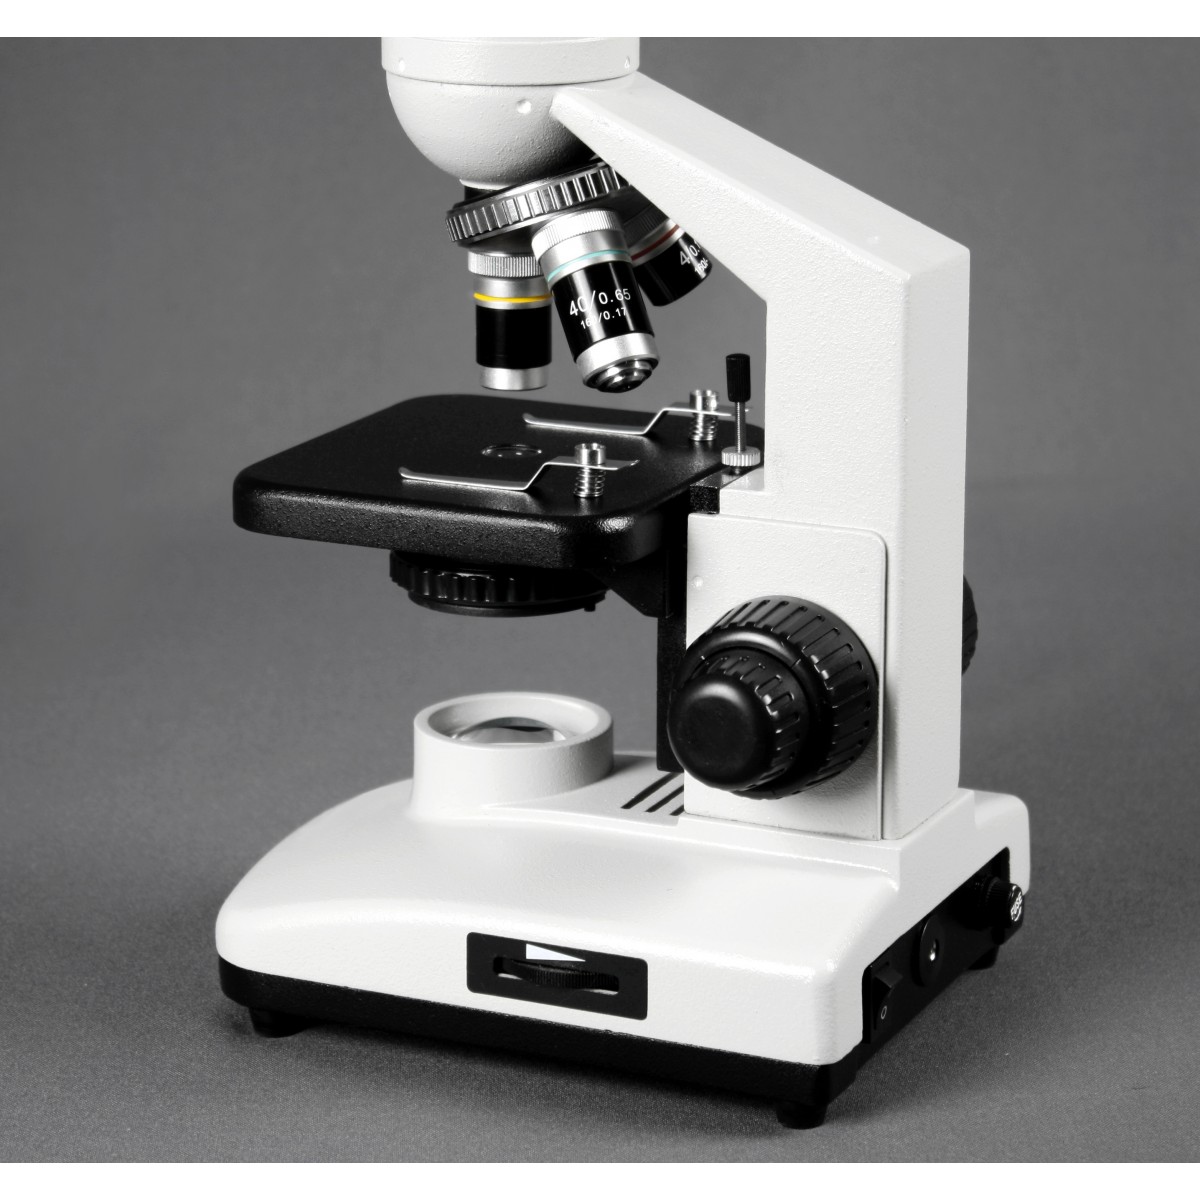 Mechanical Stage 40x-1000x Magnification 10x WF and 25x WF Eyepiece LED Illumination with Light Intensity Control Vision Scientific VME0020-E3-MS2 Student LED Microscope Coarse and Fine Focus 